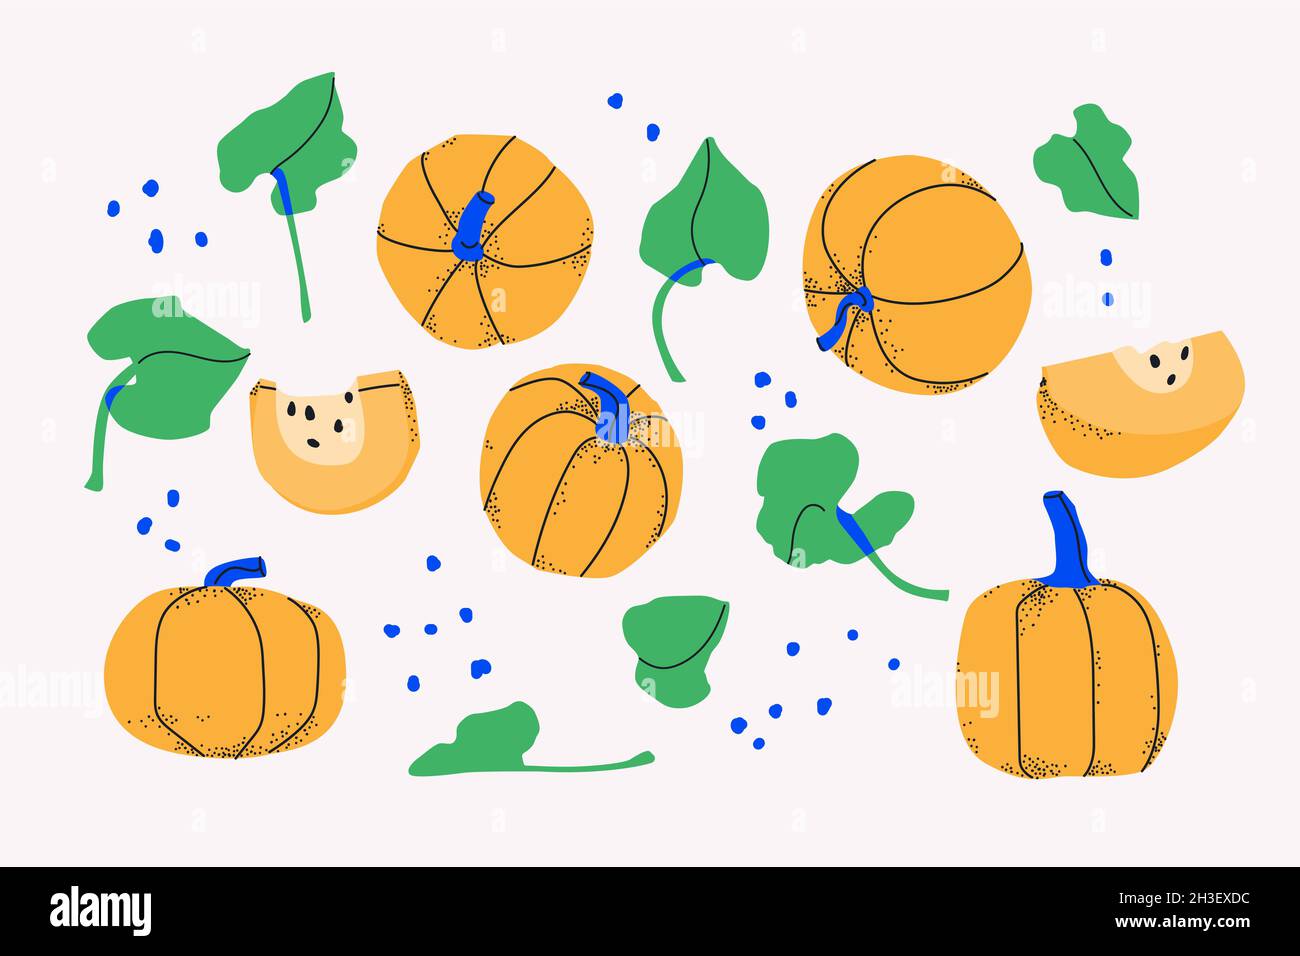 Set of decorative yellow pumpkins, slices and leaves. Vegetables isolated on white background. For design Stock Vector